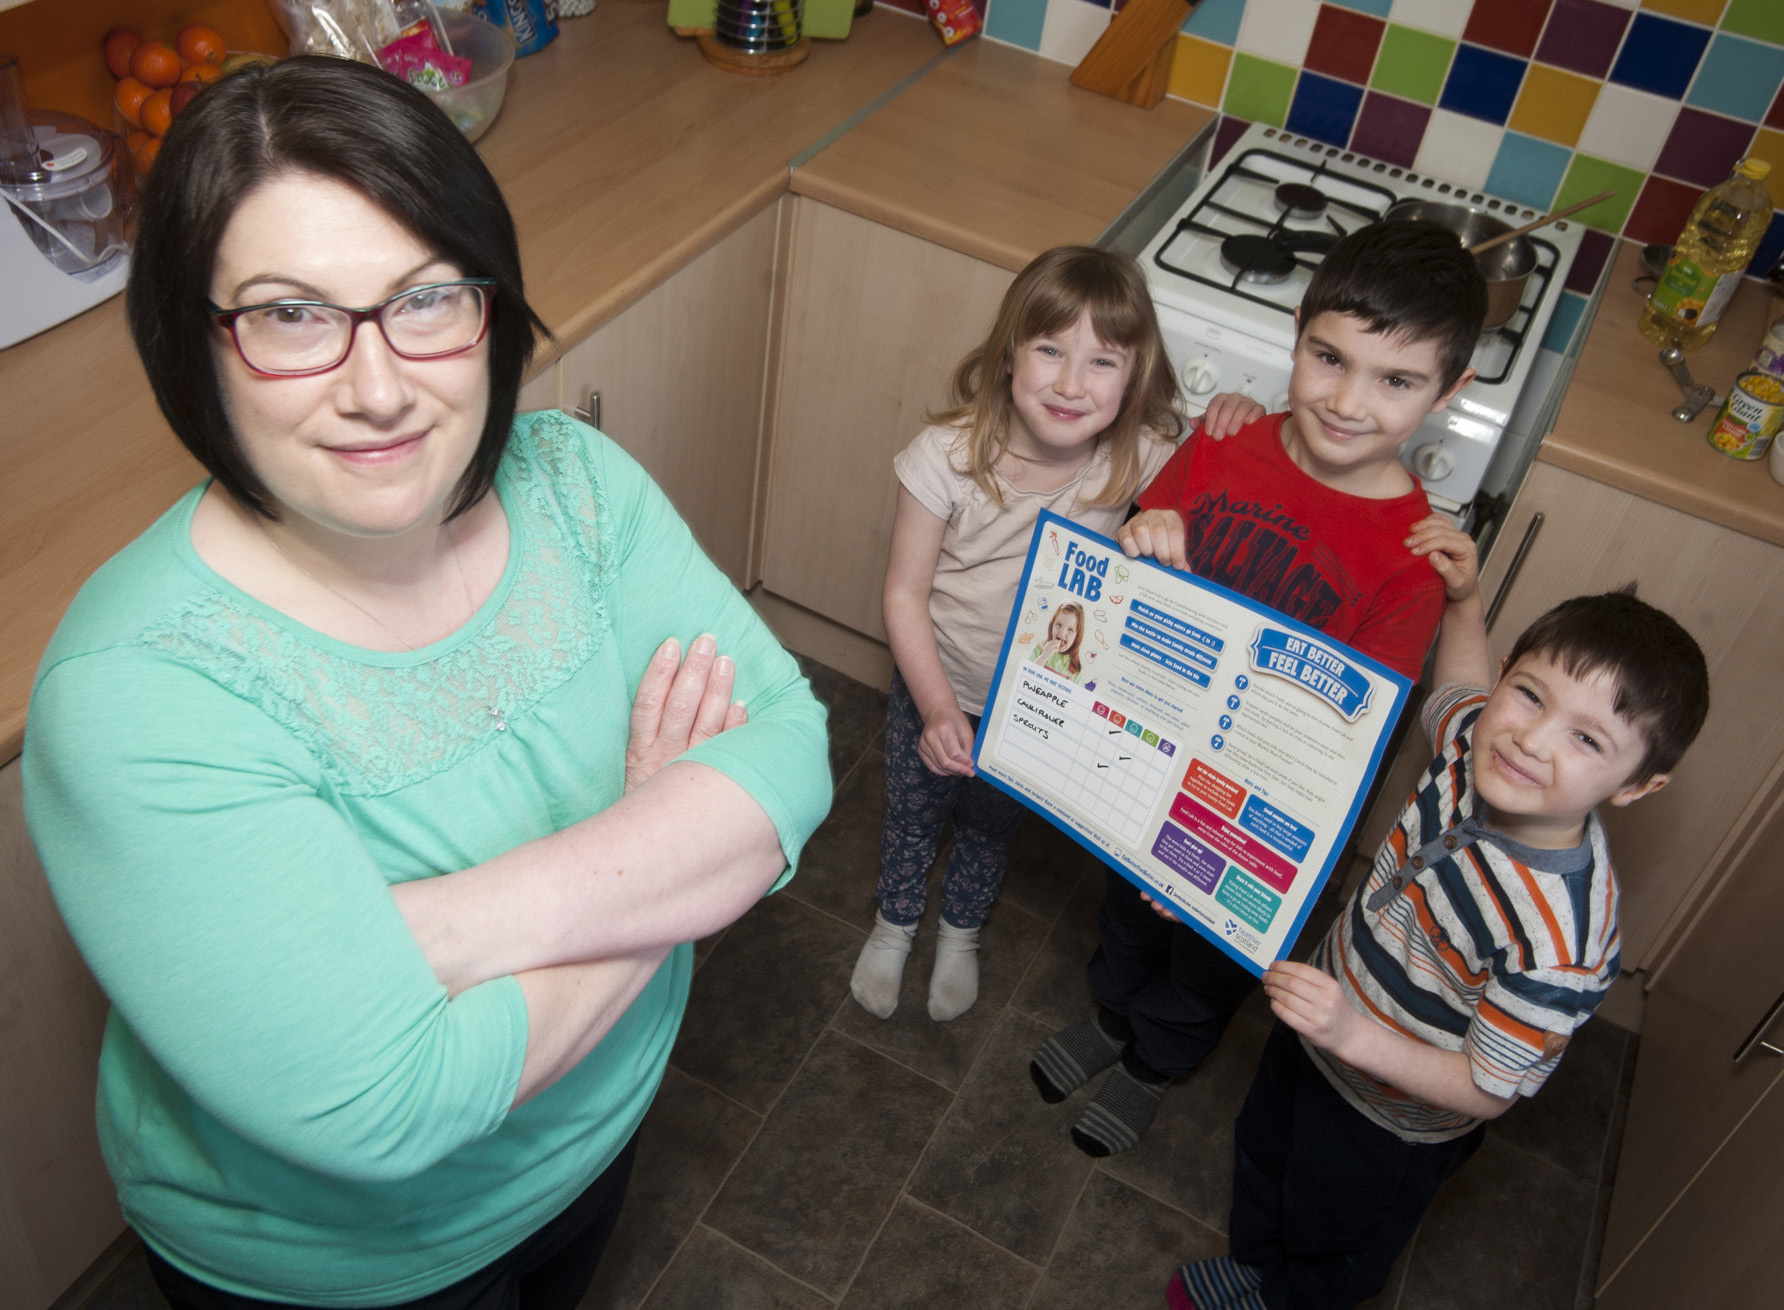 Healthy Helpers: Vicky Dunbar from Huntly with her kids Emmy, 6, Michael, 7 and Jack, 6.